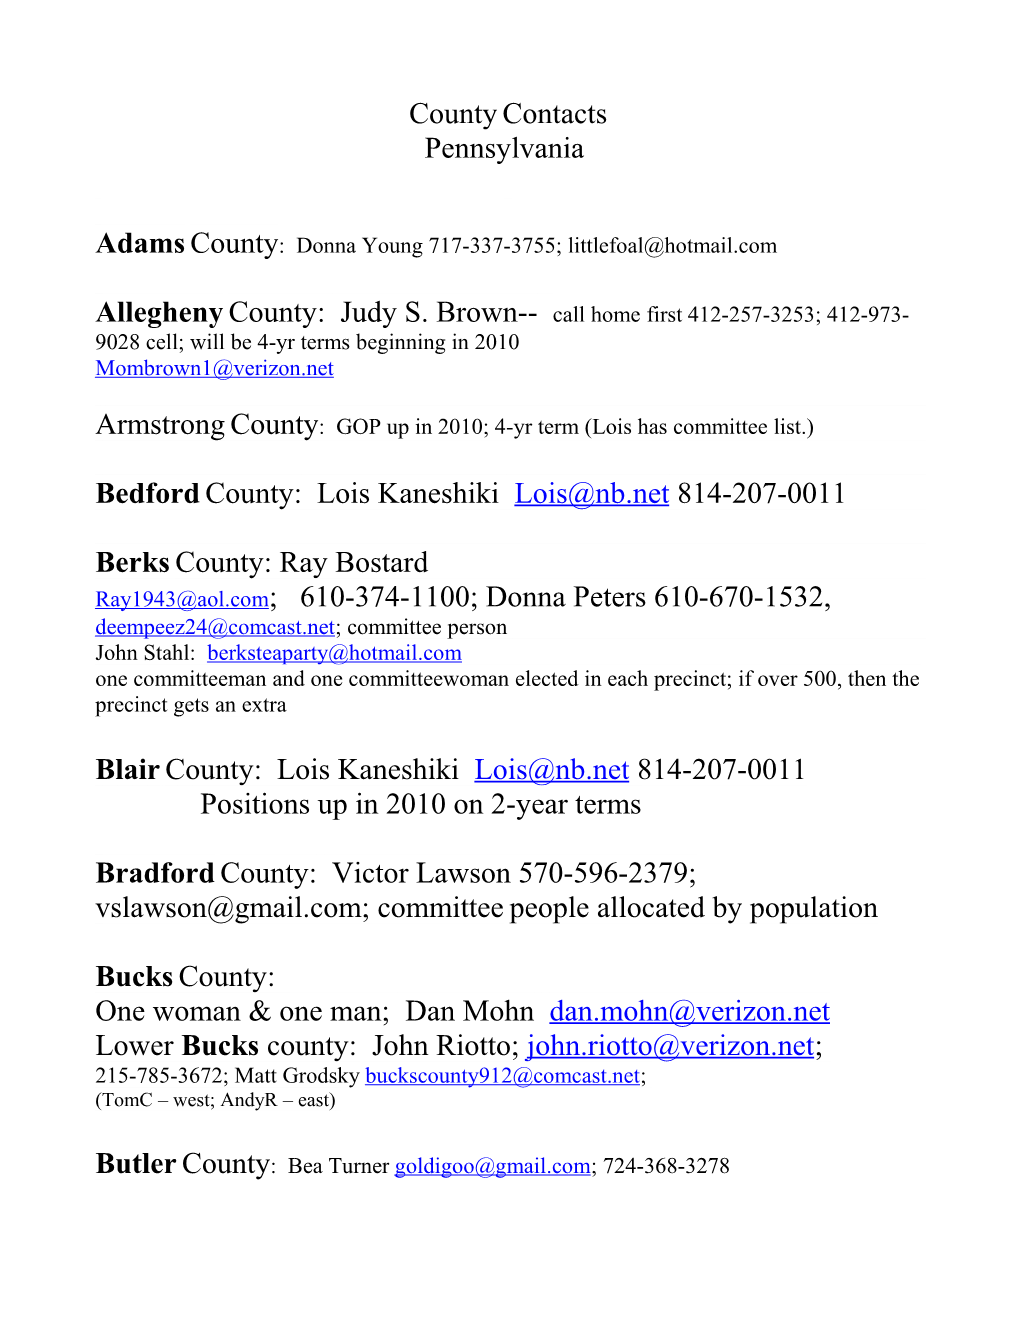 County and Congressional District Contacts